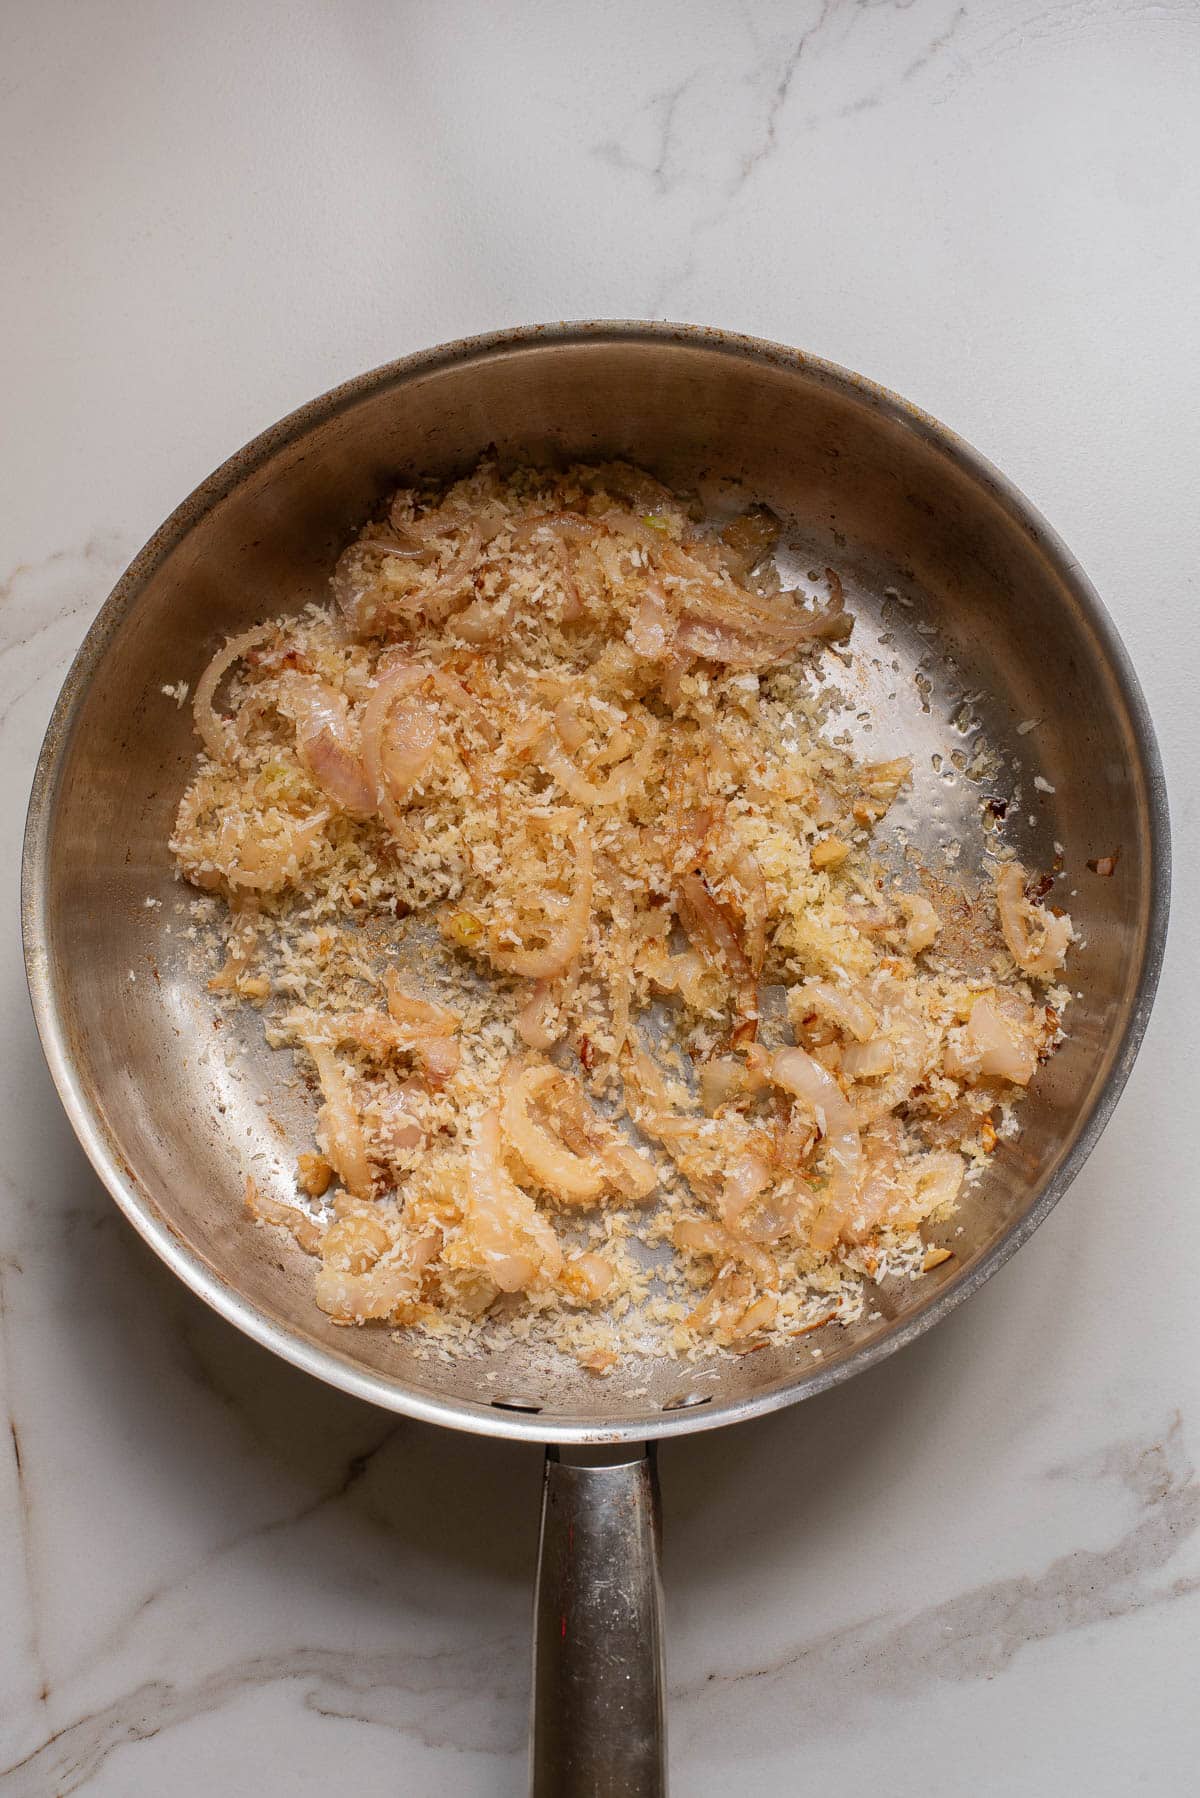 Cooked onions and Panko breadcrumbs in pan.